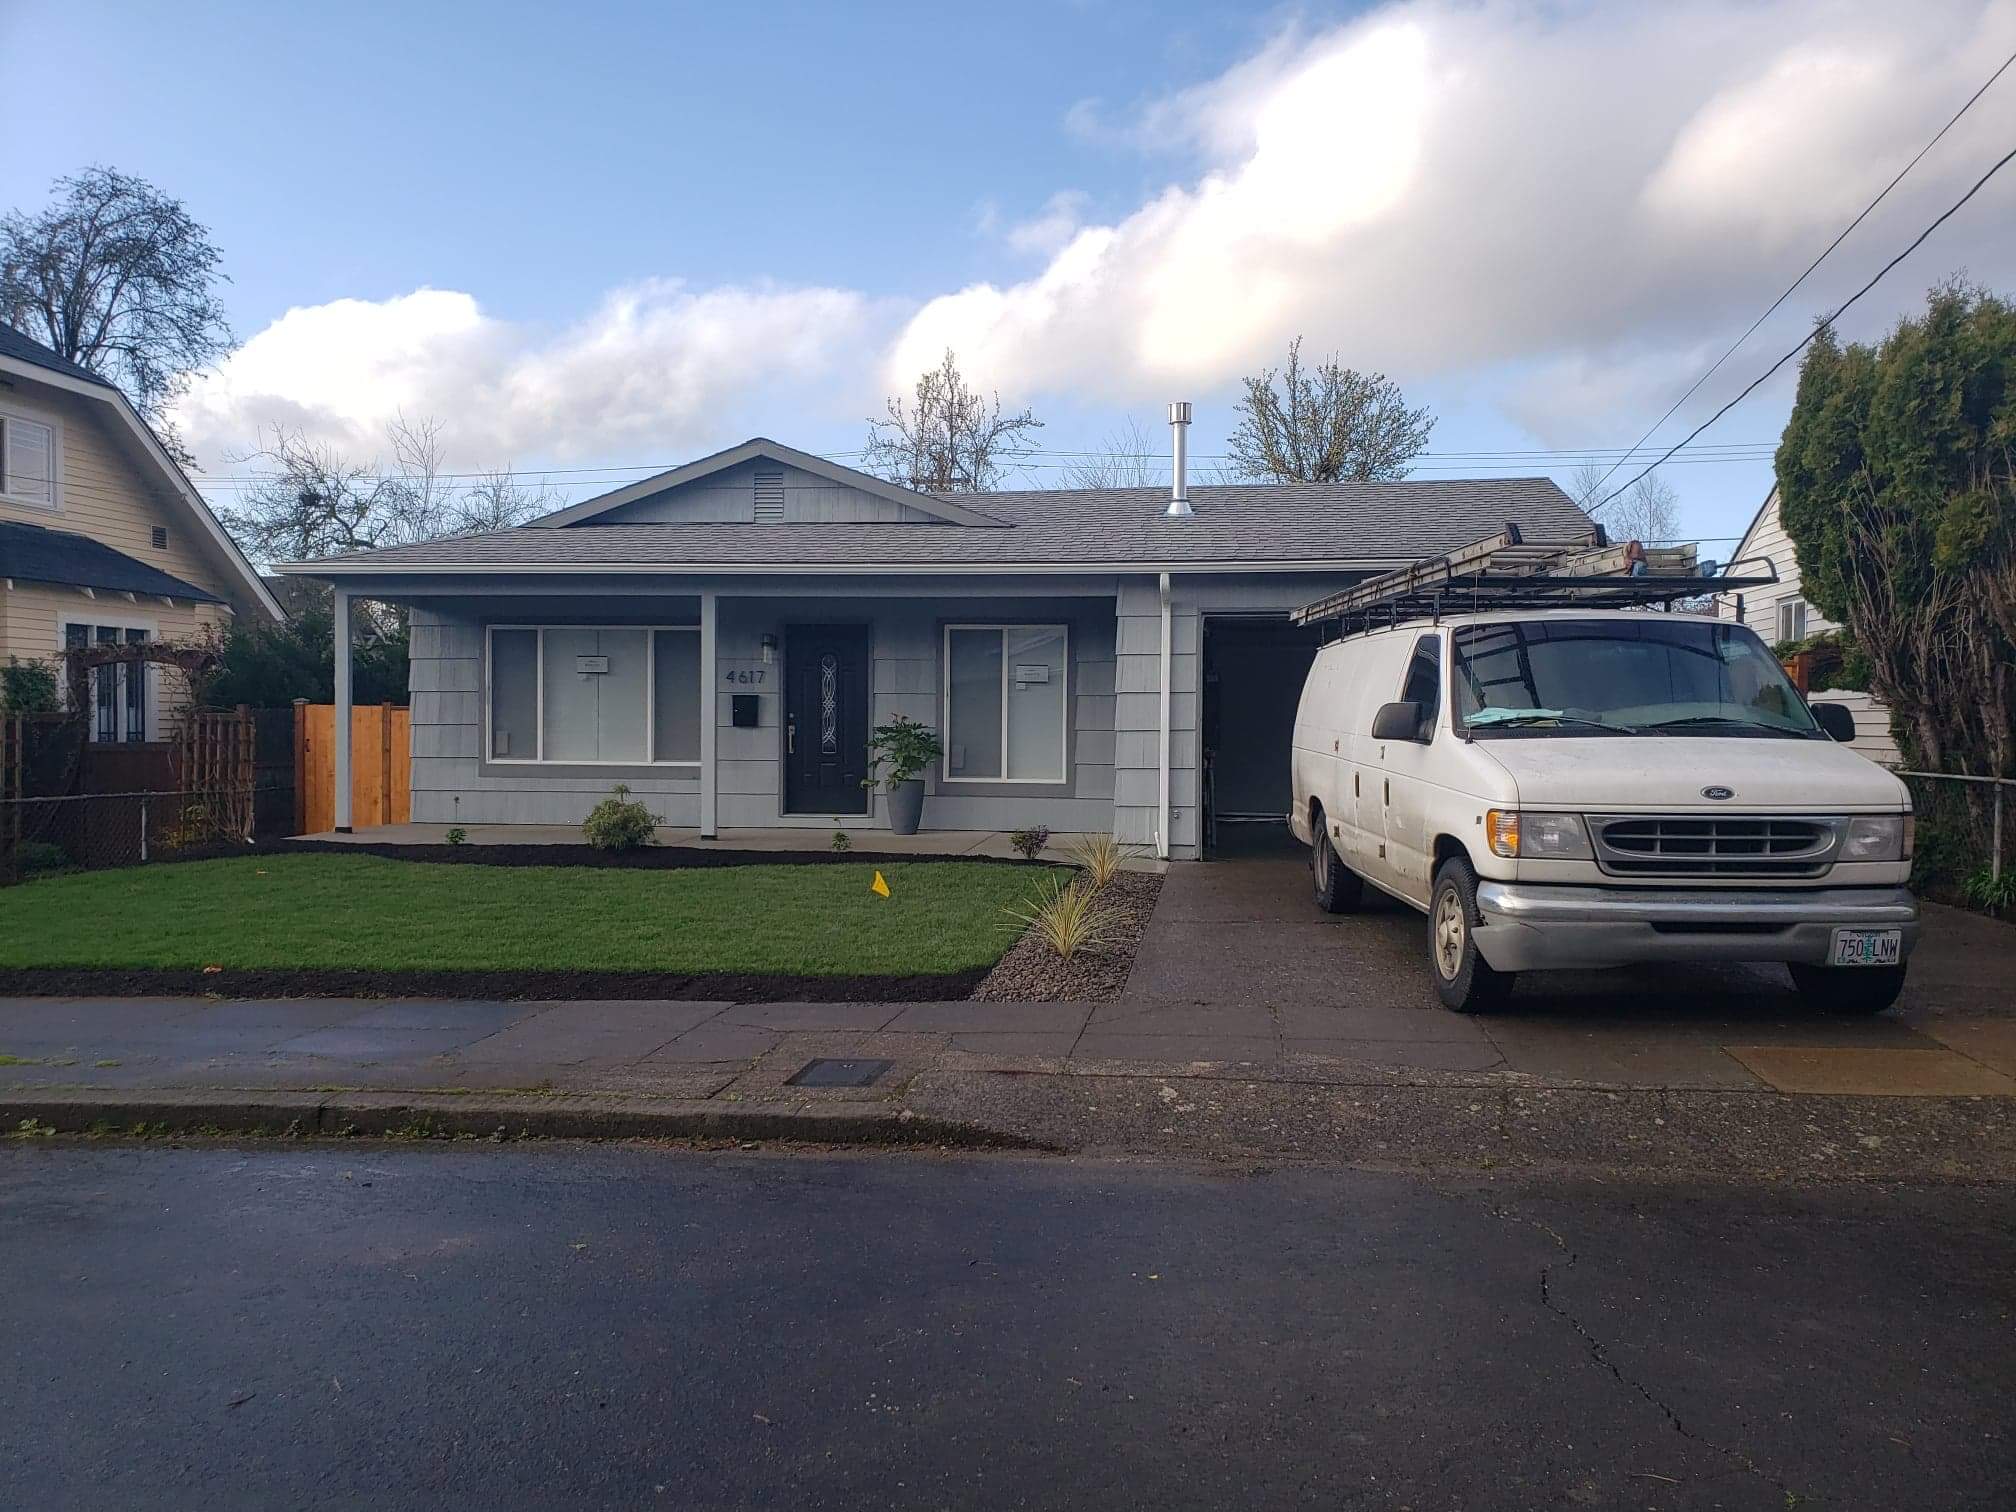 complete renovated home, new grass front yard, and gravel.